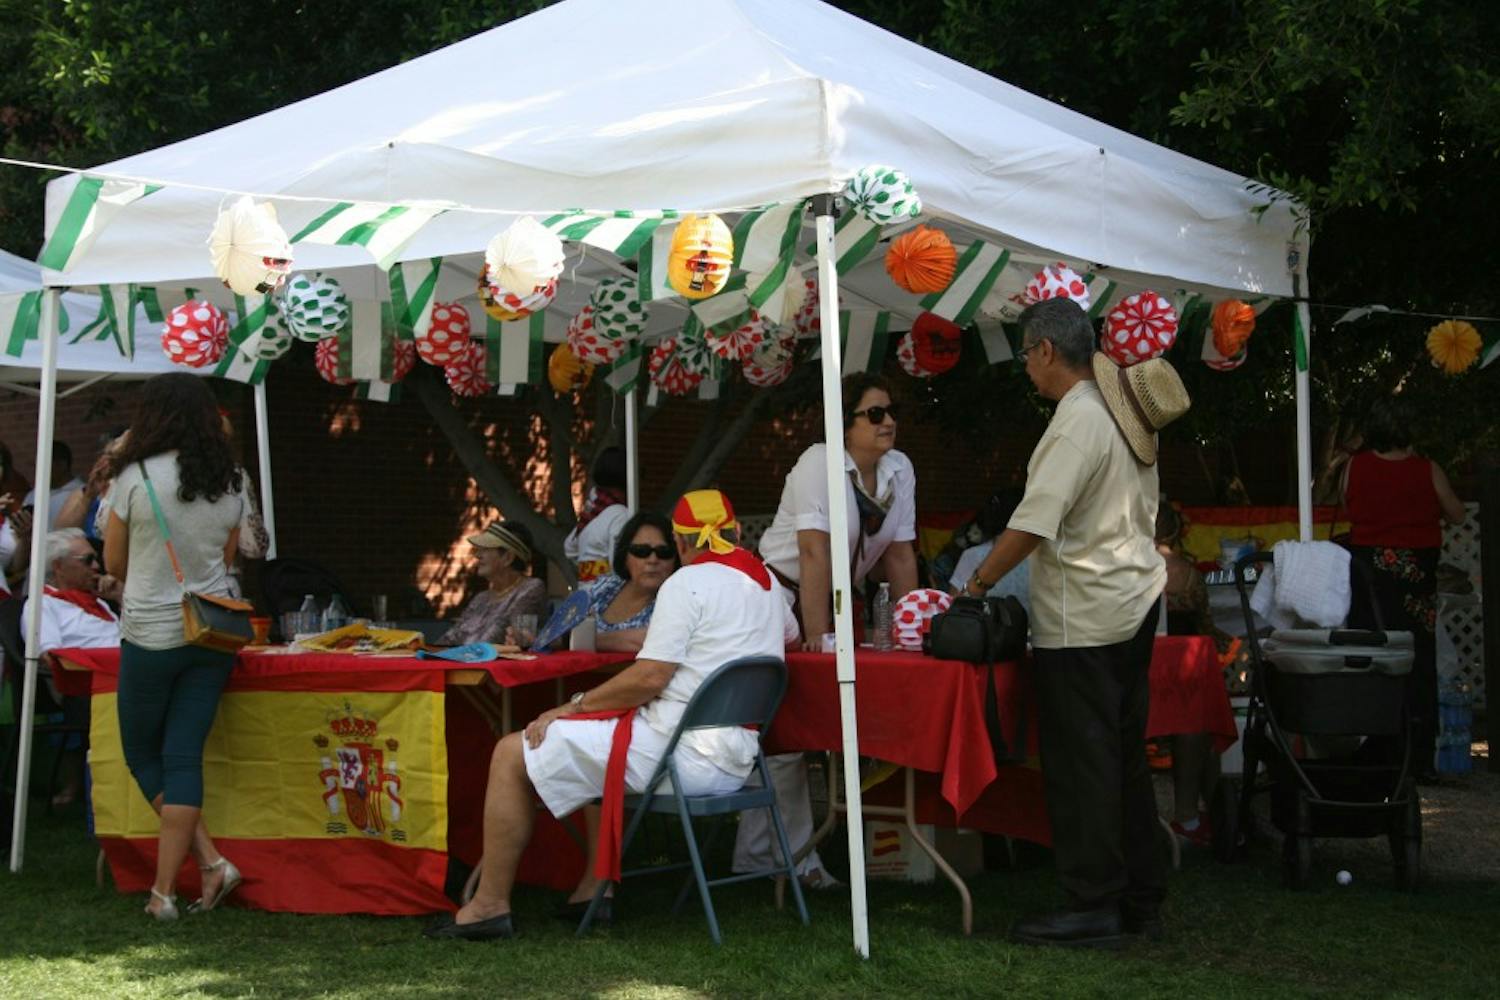 One of many booths set up on March 22, 2015 at the Festival de España at the Phoenix Center for the Arts. (Celina Jimenez/The State Press)